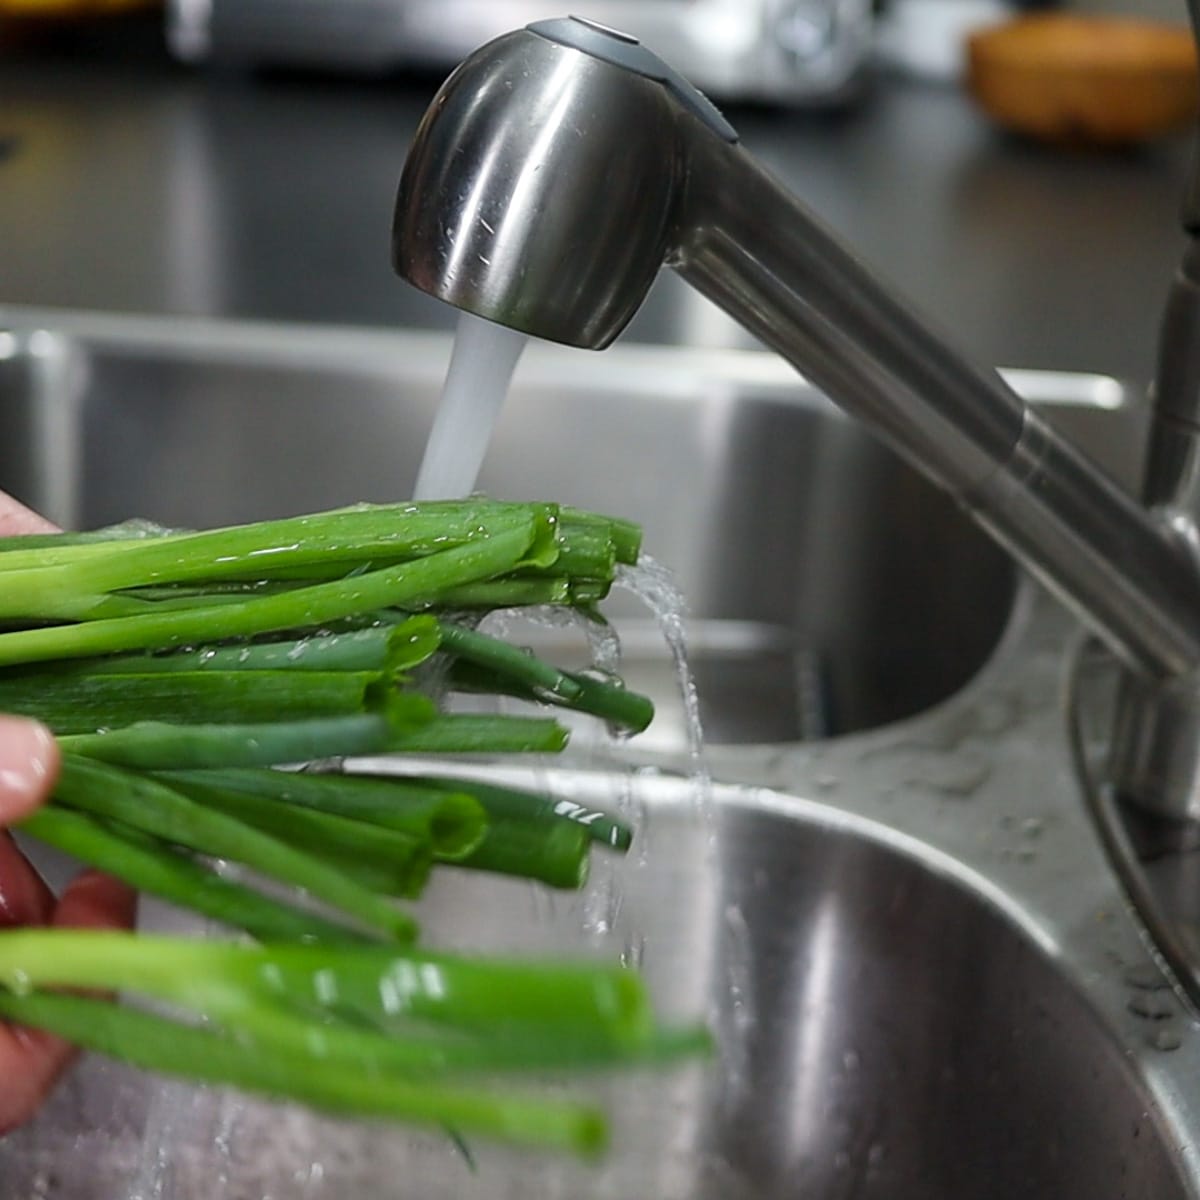 Washing green onions in the sink with cold water
